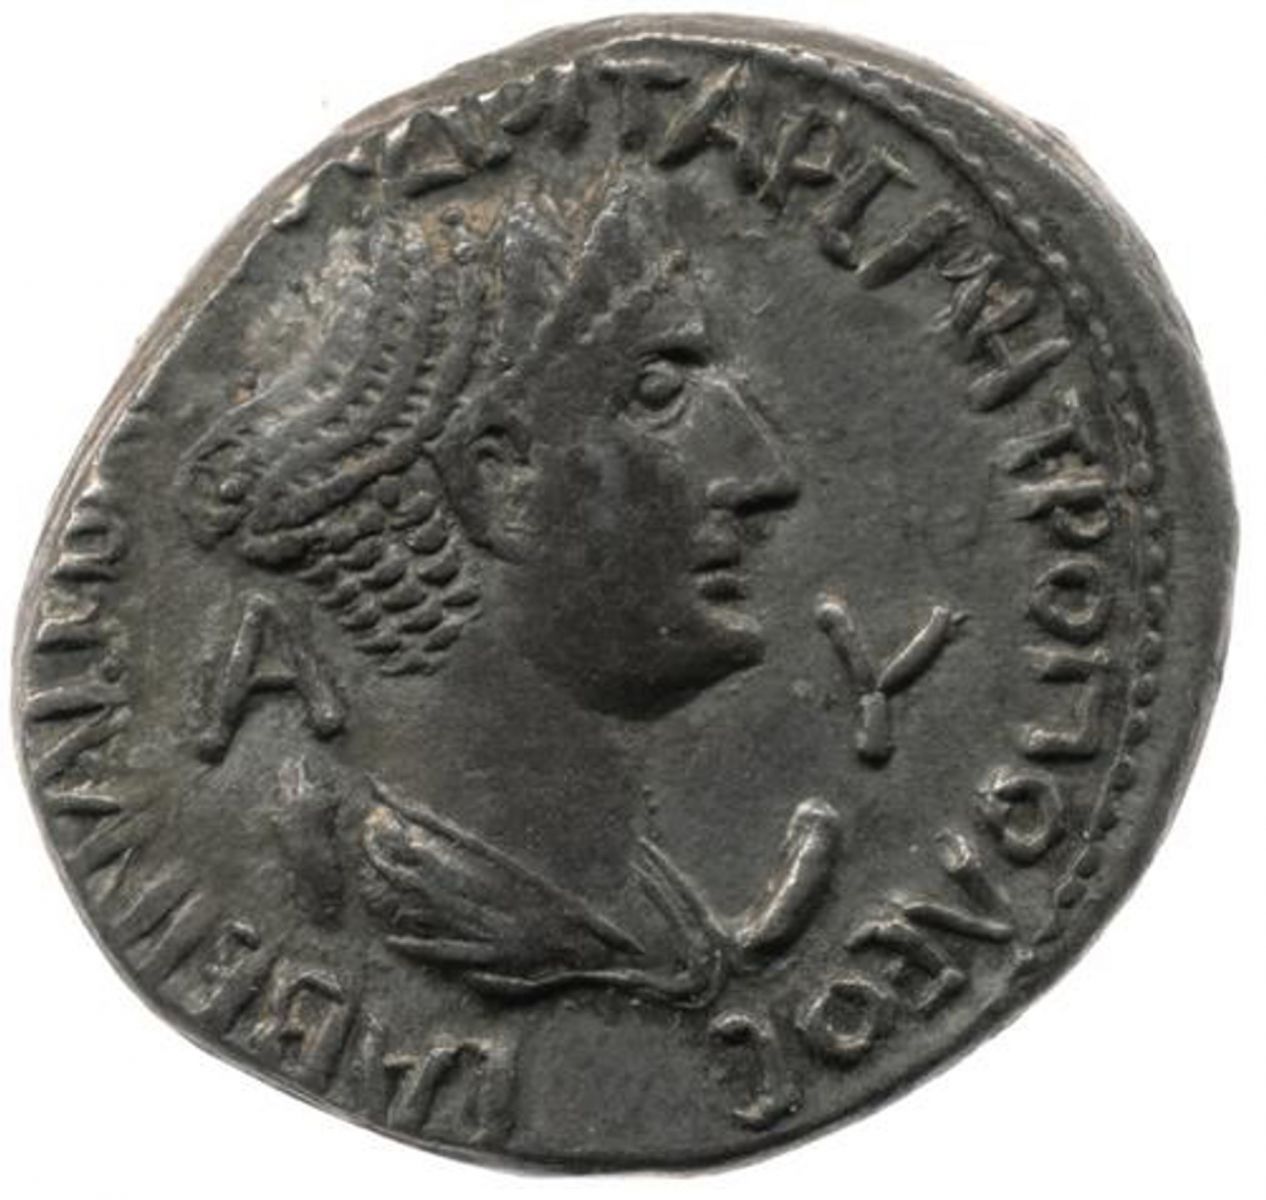 A gray coin with an image of Sabina looking to the right. Her hair is braided into an updo.